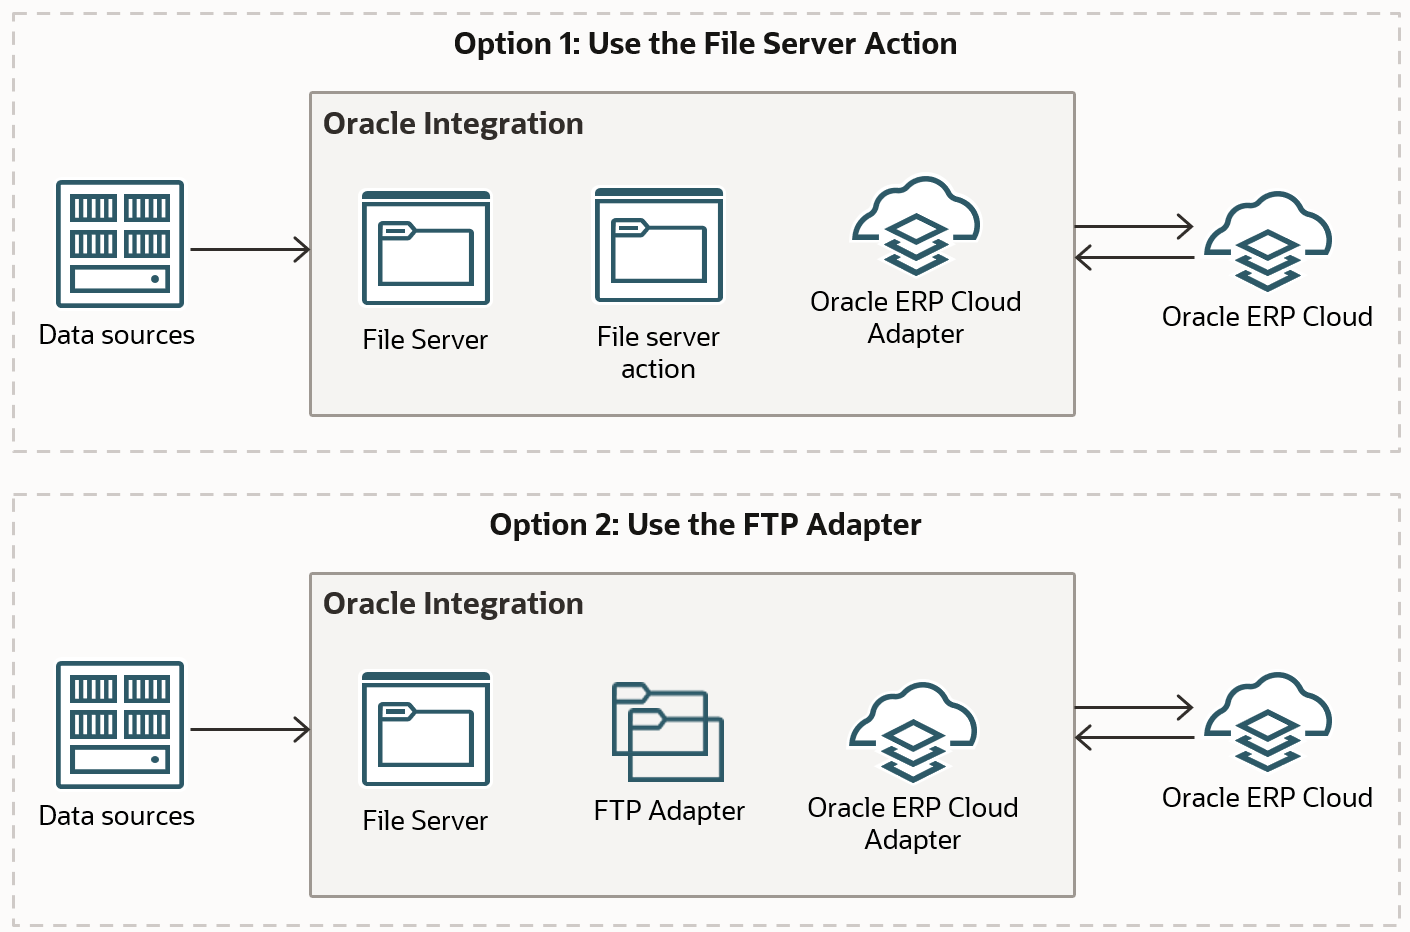 Data sources appears on the left, with an arrow pointing to Oracle integration in the middle. Within the Oracle Integration box are File Server, File server action, and Oracle ERP Cloud Adapter. Arrows pointing in both directions connect Oracle Integration with Oracle ERP Cloud on the right.